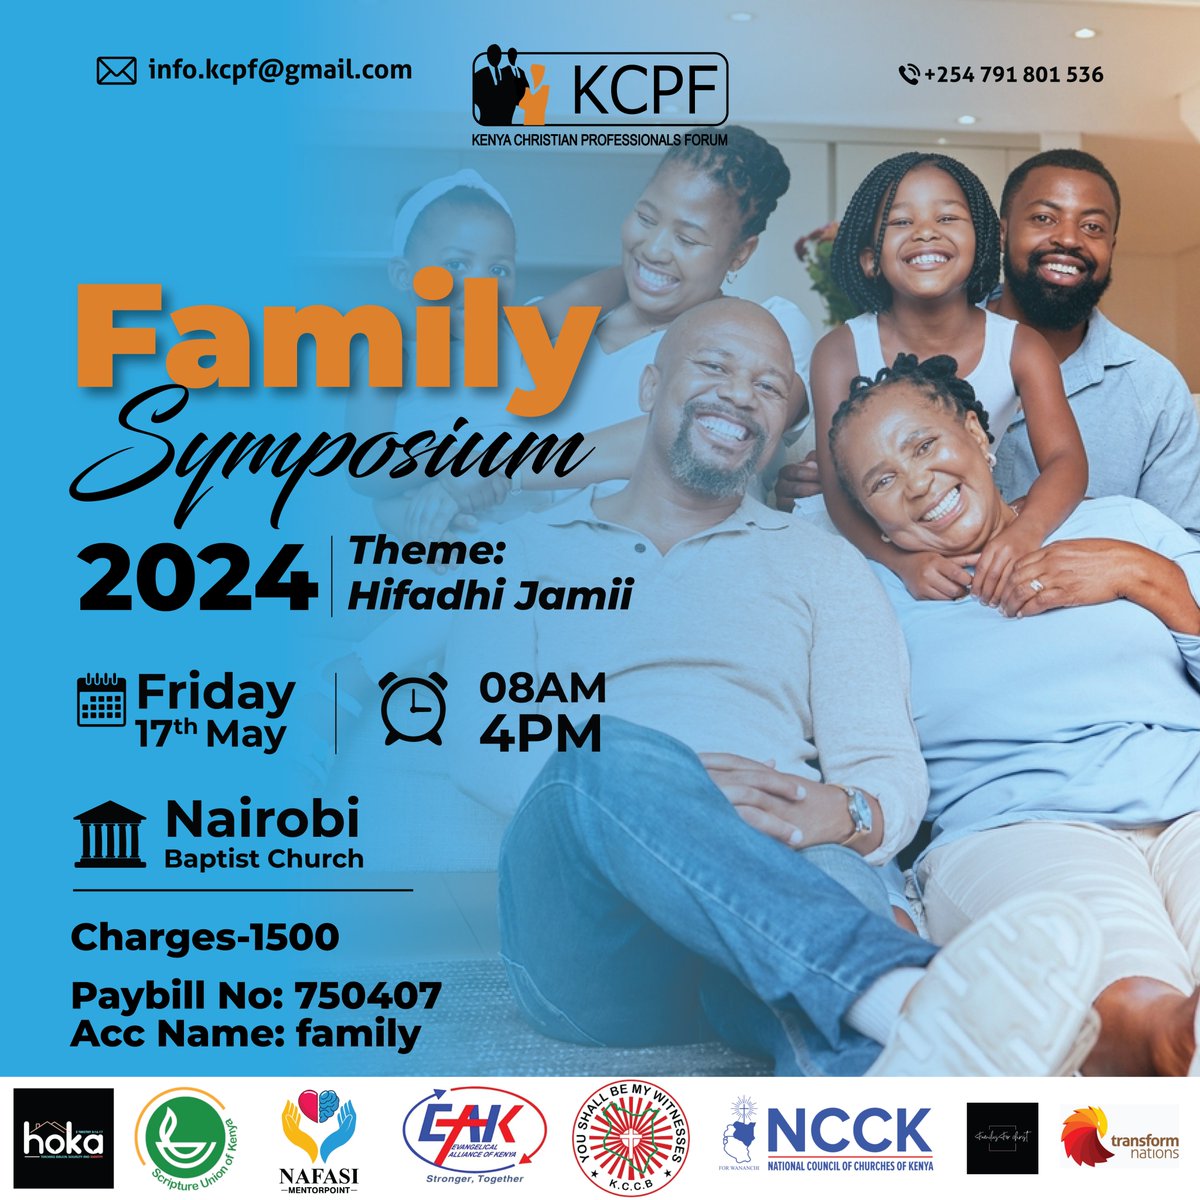 Save the date for the family symposium 2024!